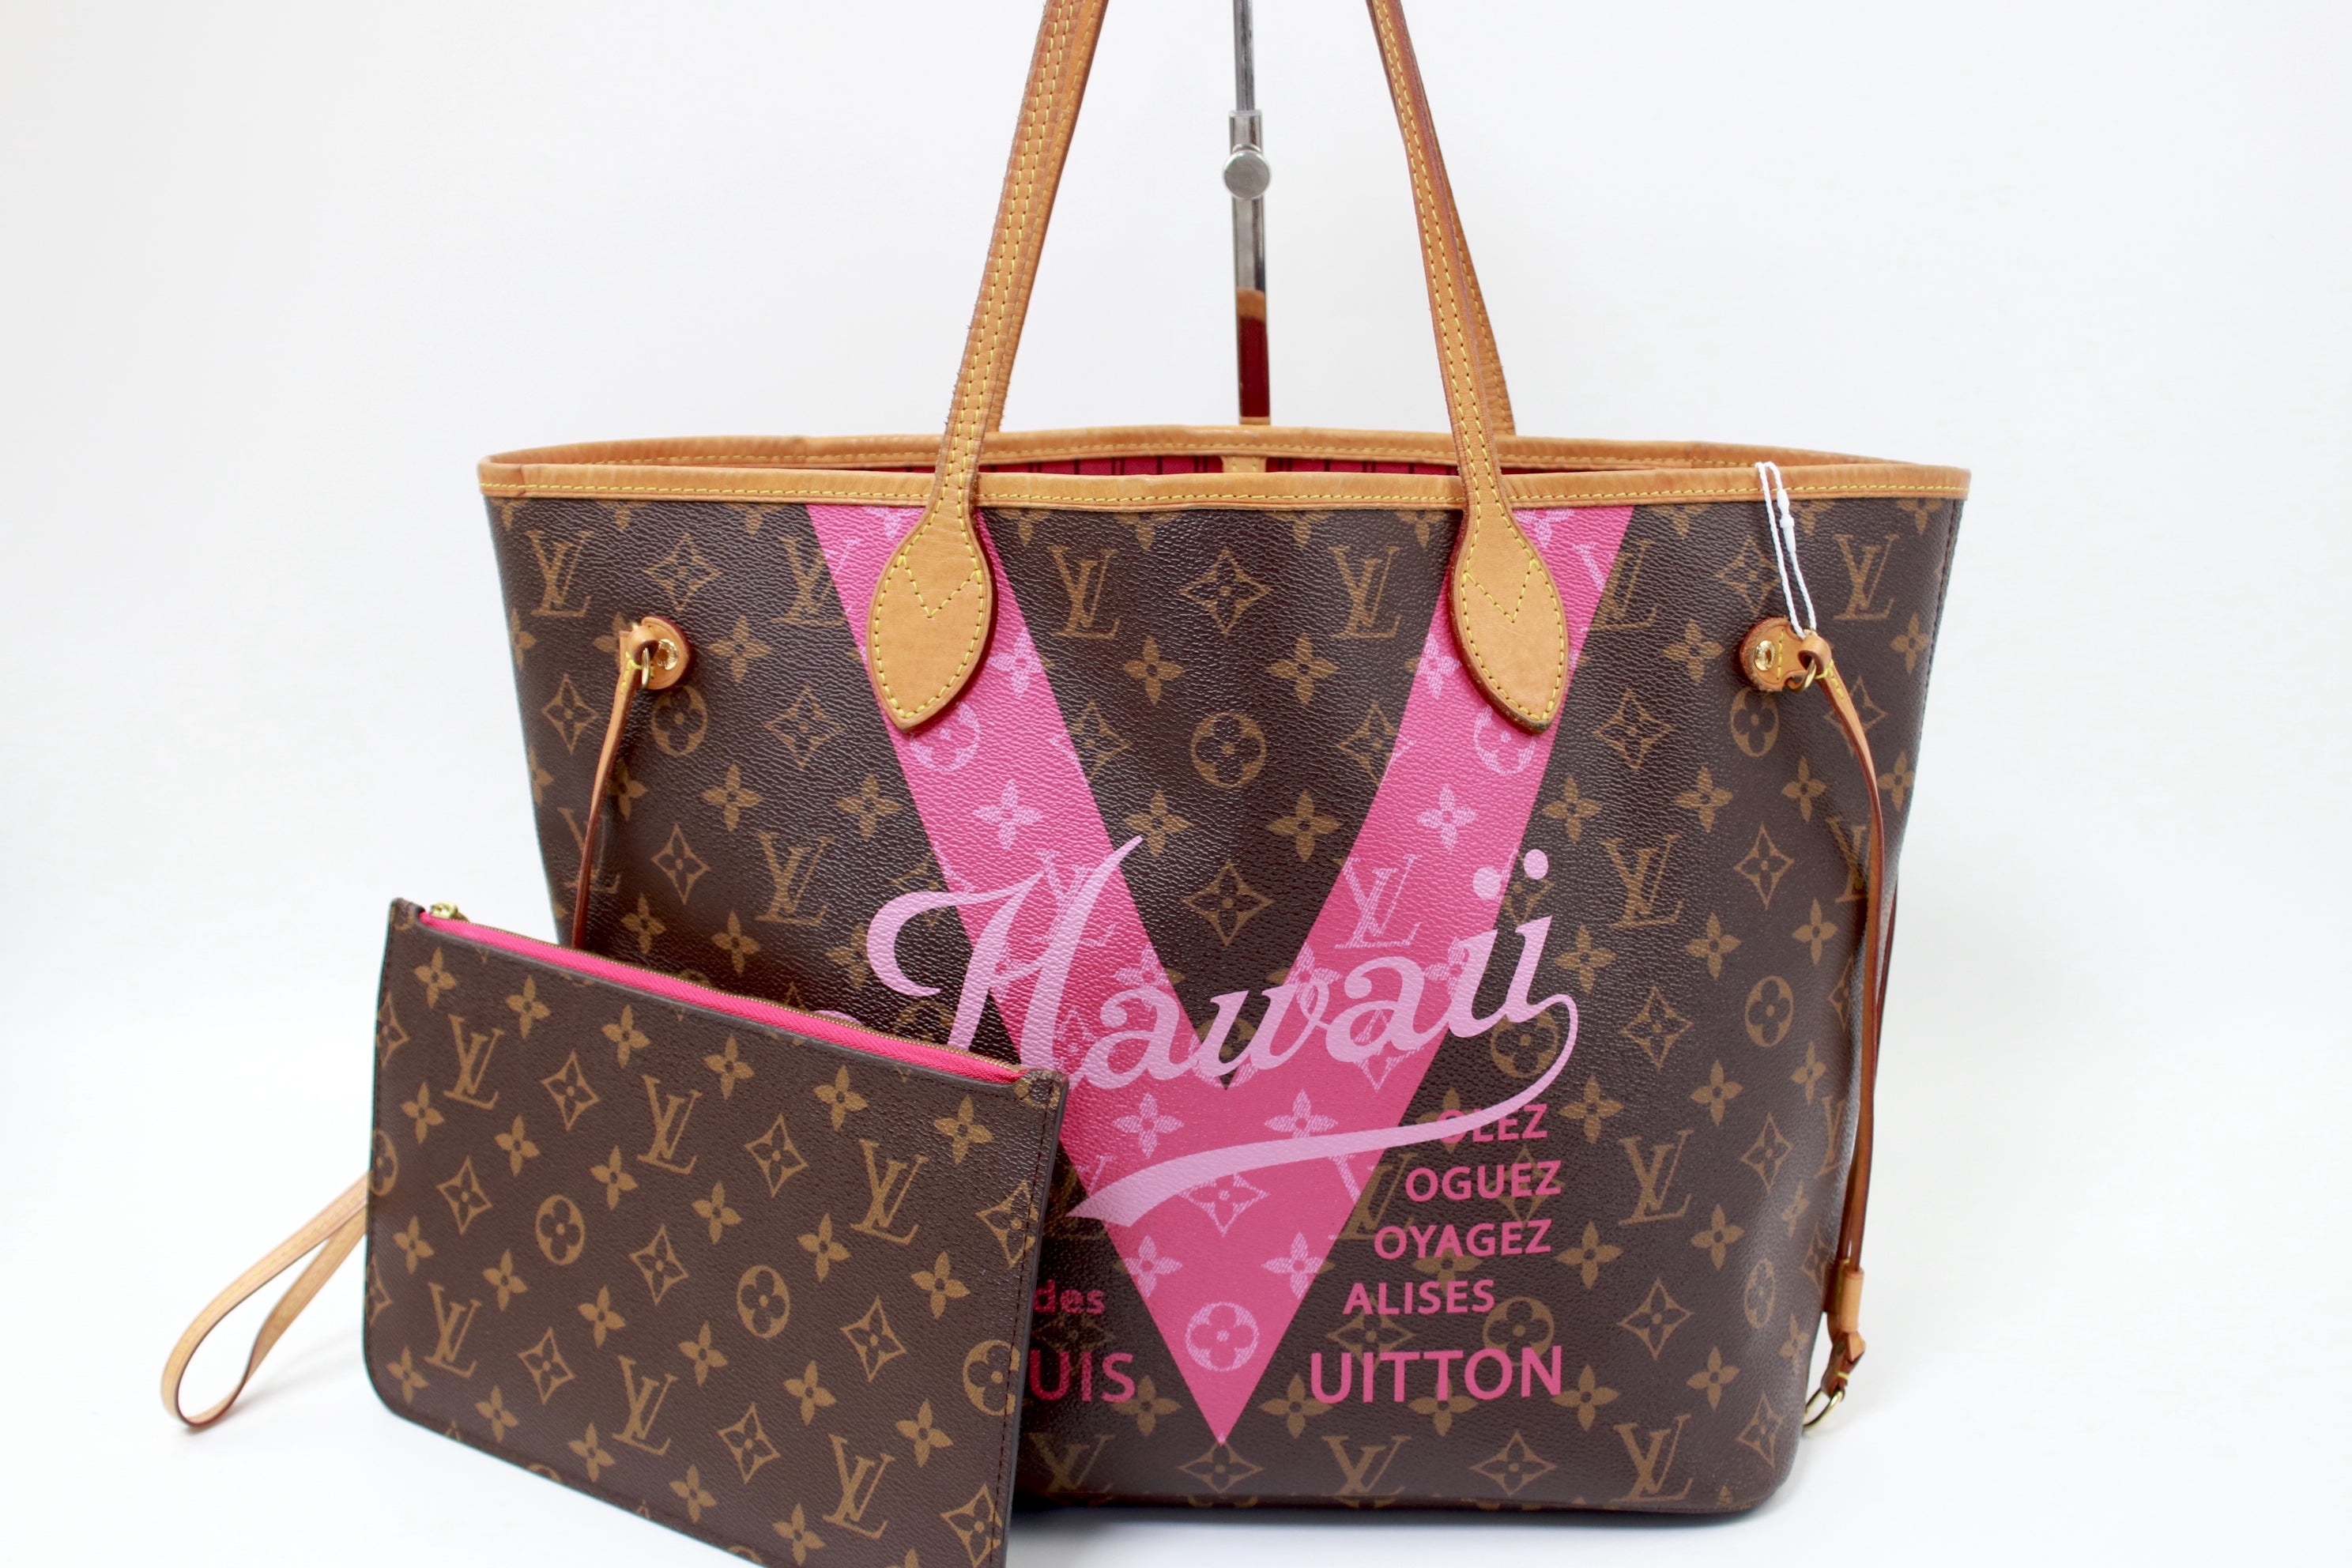 Louis Vuitton Neverfull MM Summer Trunk Hawaii Limited Edition Used (6042)